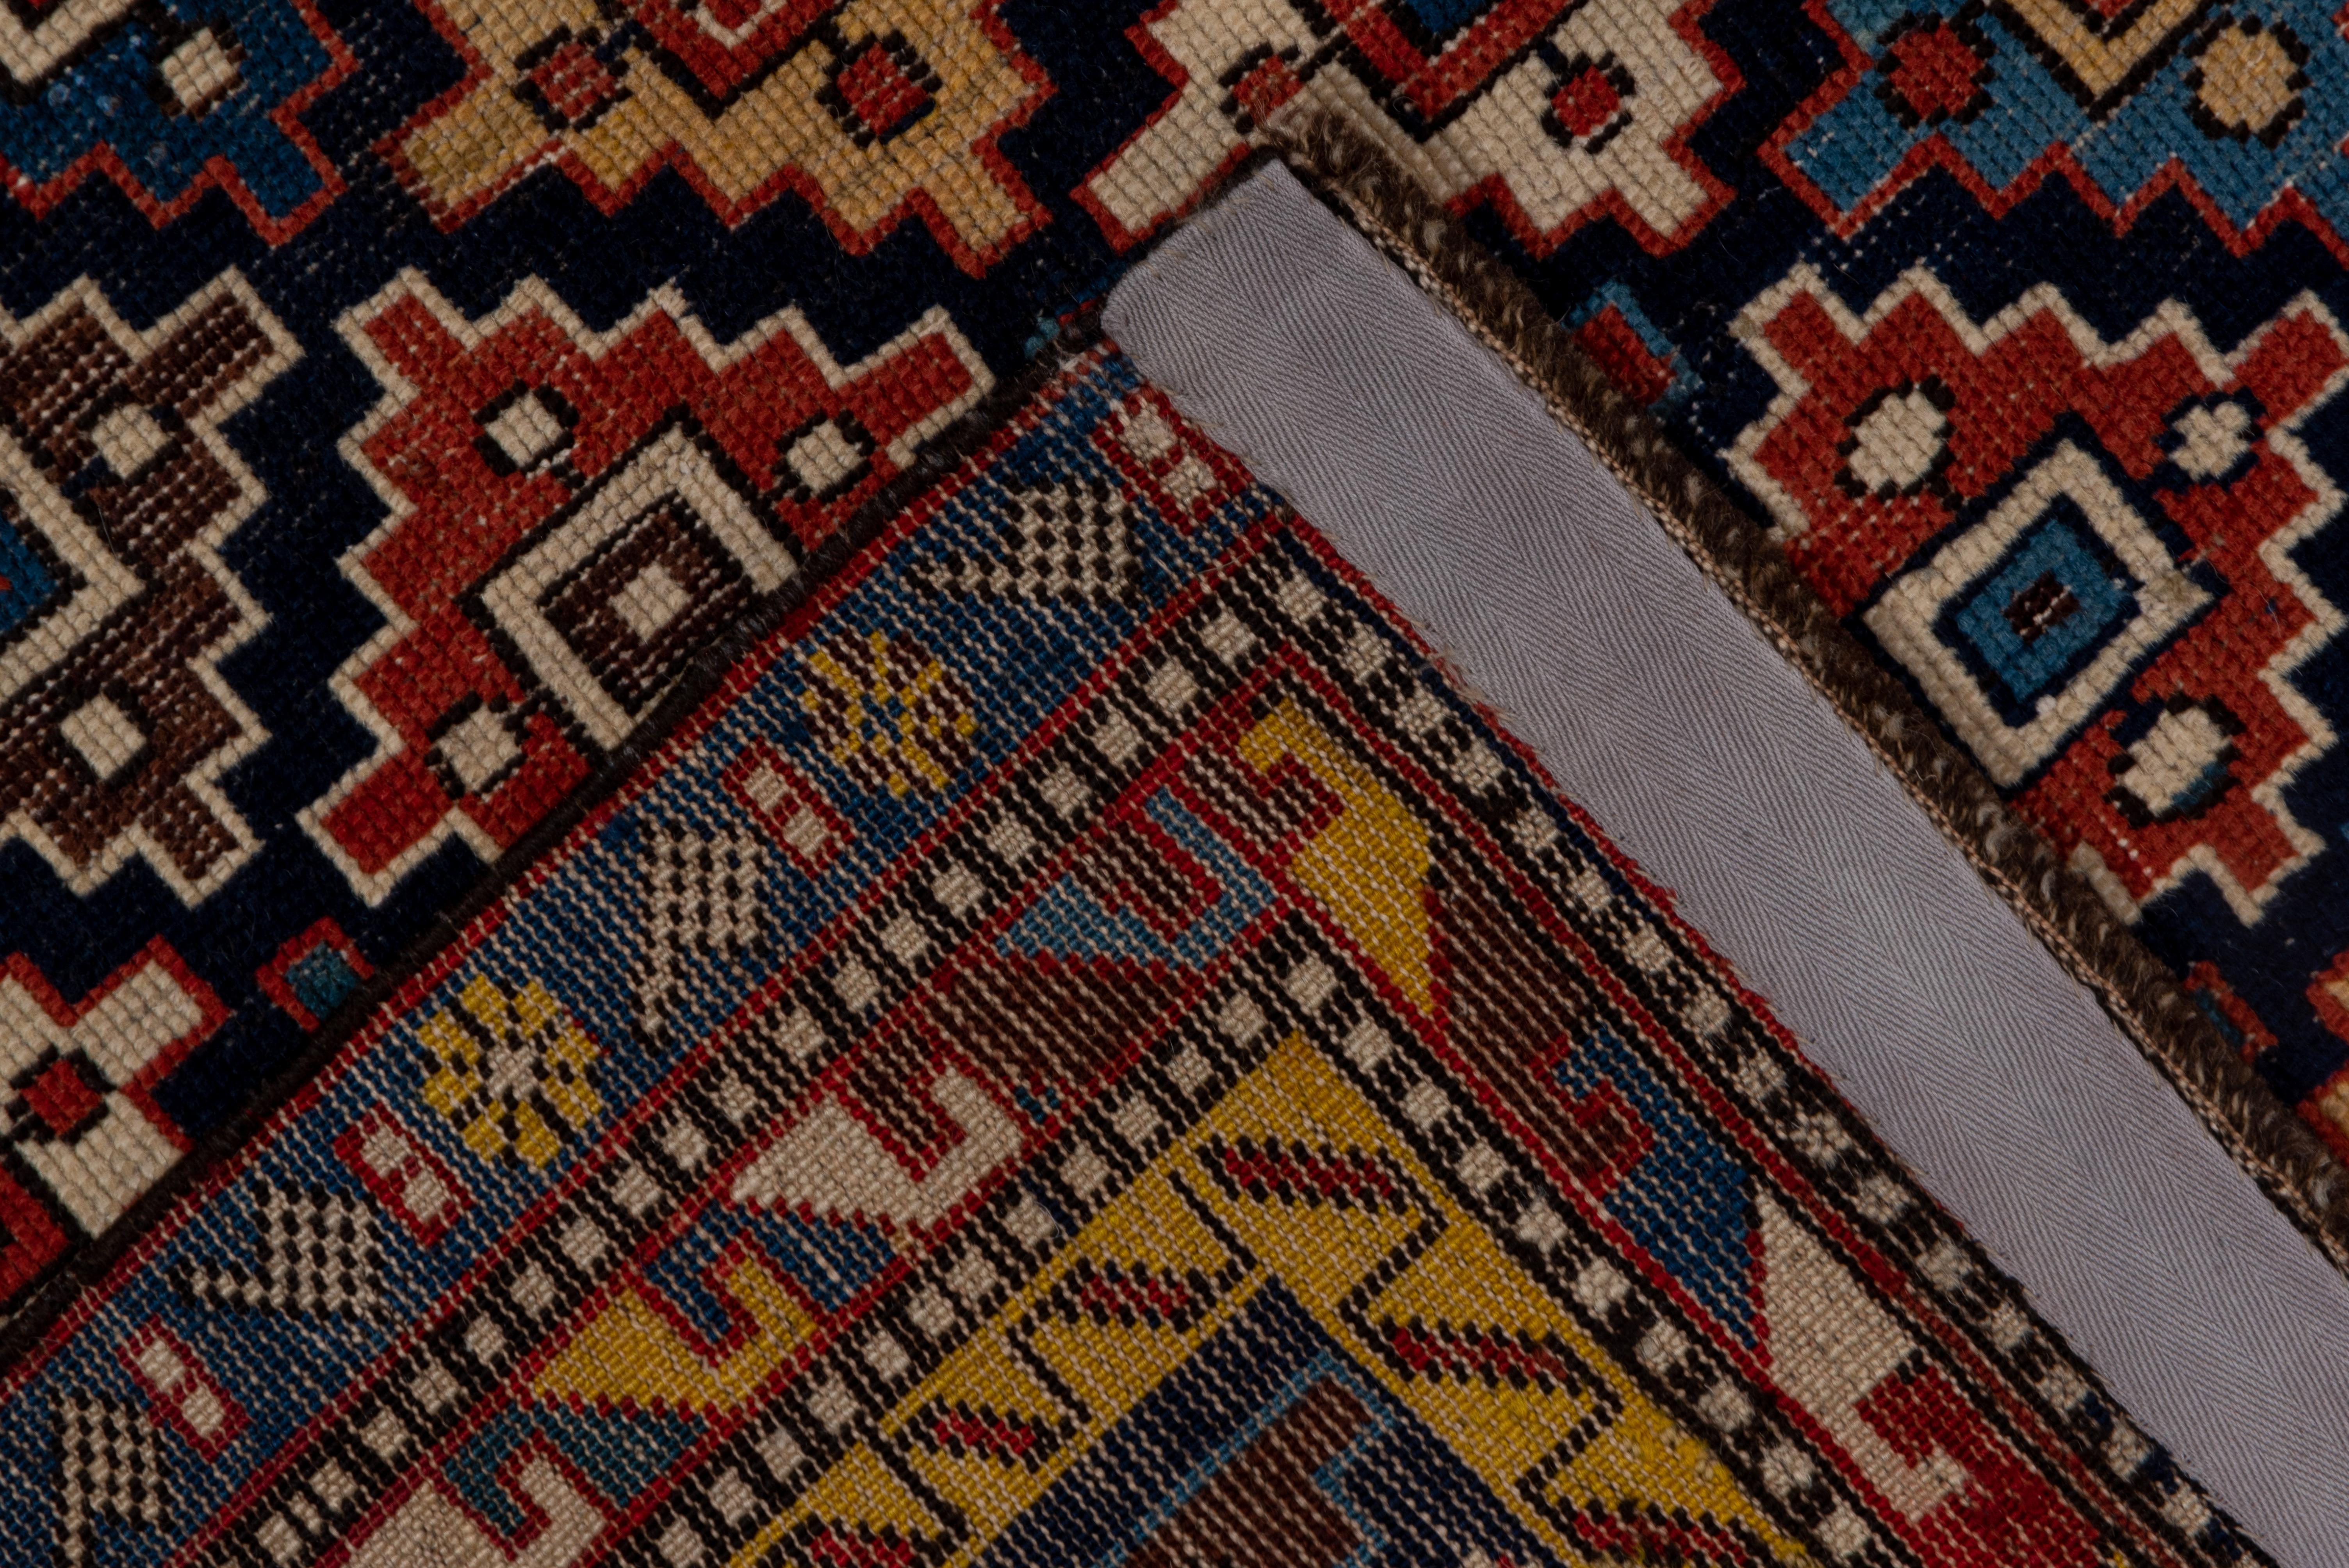 This boldly colored east Caucasian scatter rug shows a pattern of closely set, randomly toned stepped diamonds on a dark indigo ground. Red, cream, teal, blue shades and yellow are among the detail hues. Narrow borders centered on a polychrome